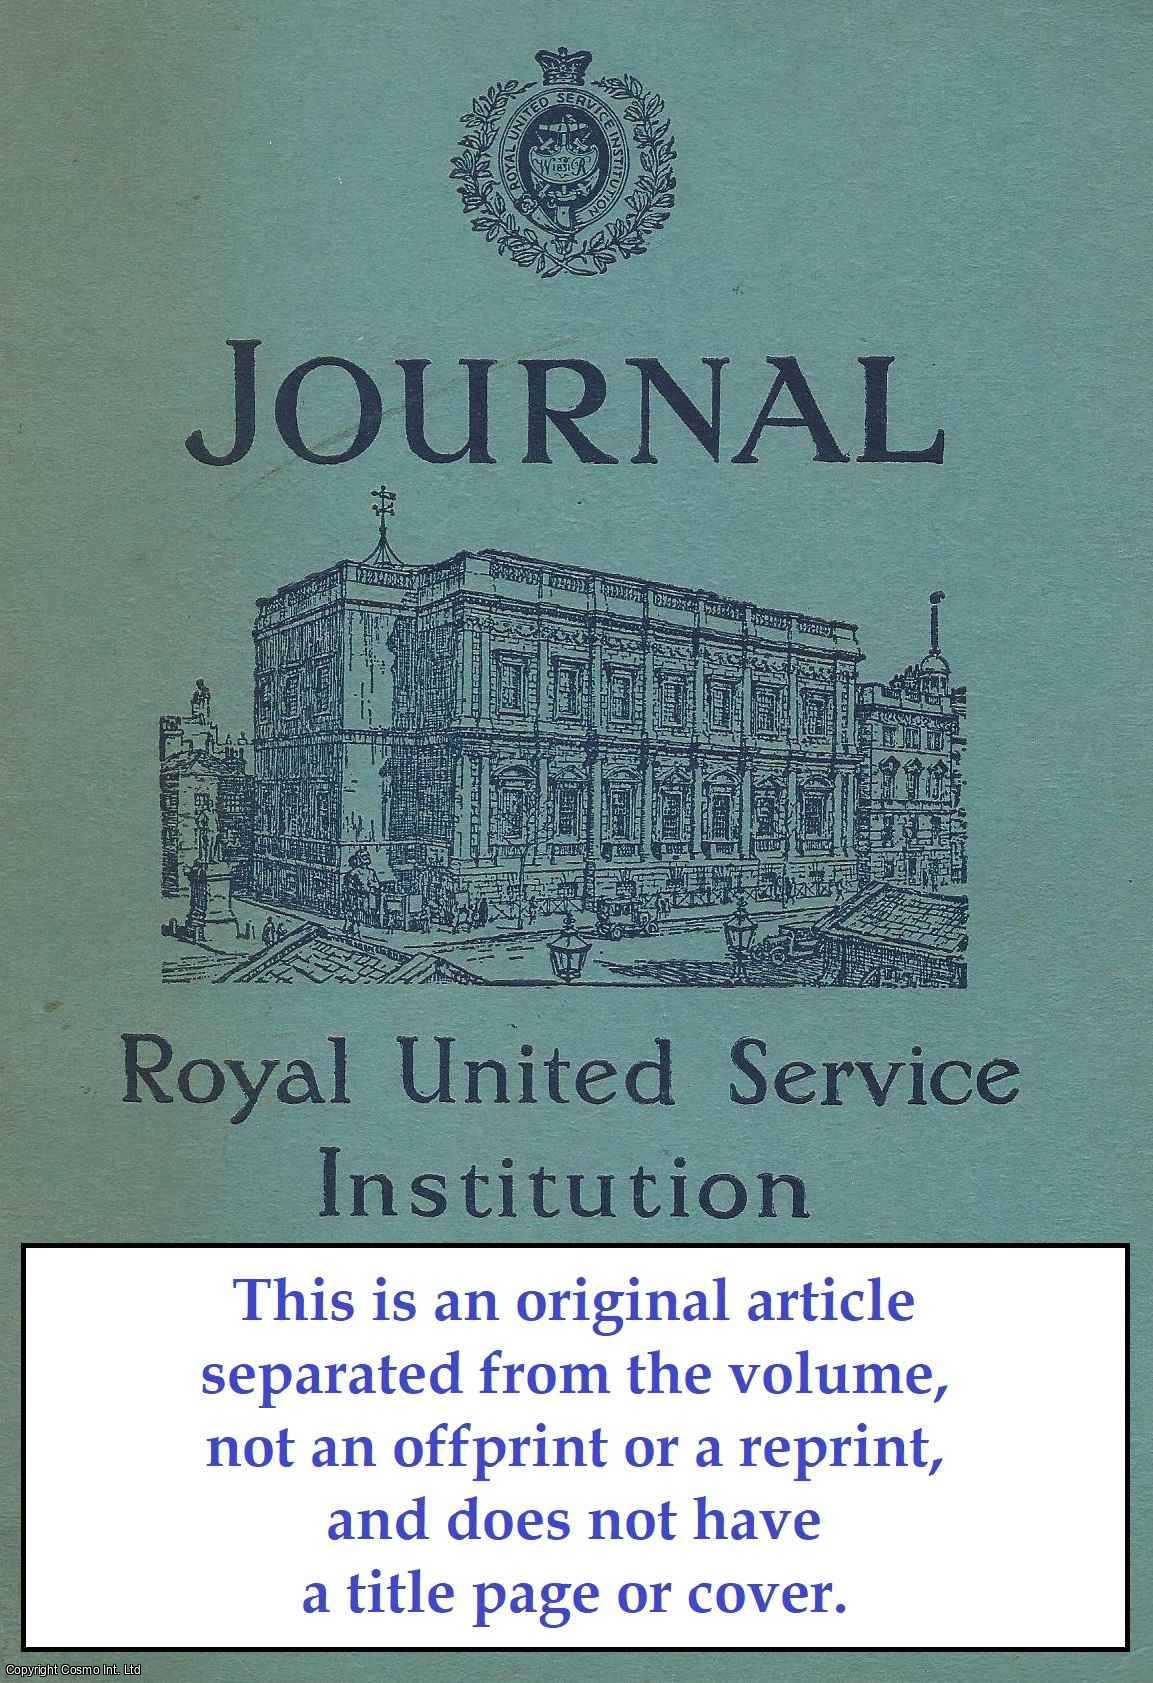 Robert N. Bax - The Salving of H. M. S. Howe. An original article from Journal of The Royal United Service Institution, 1954.